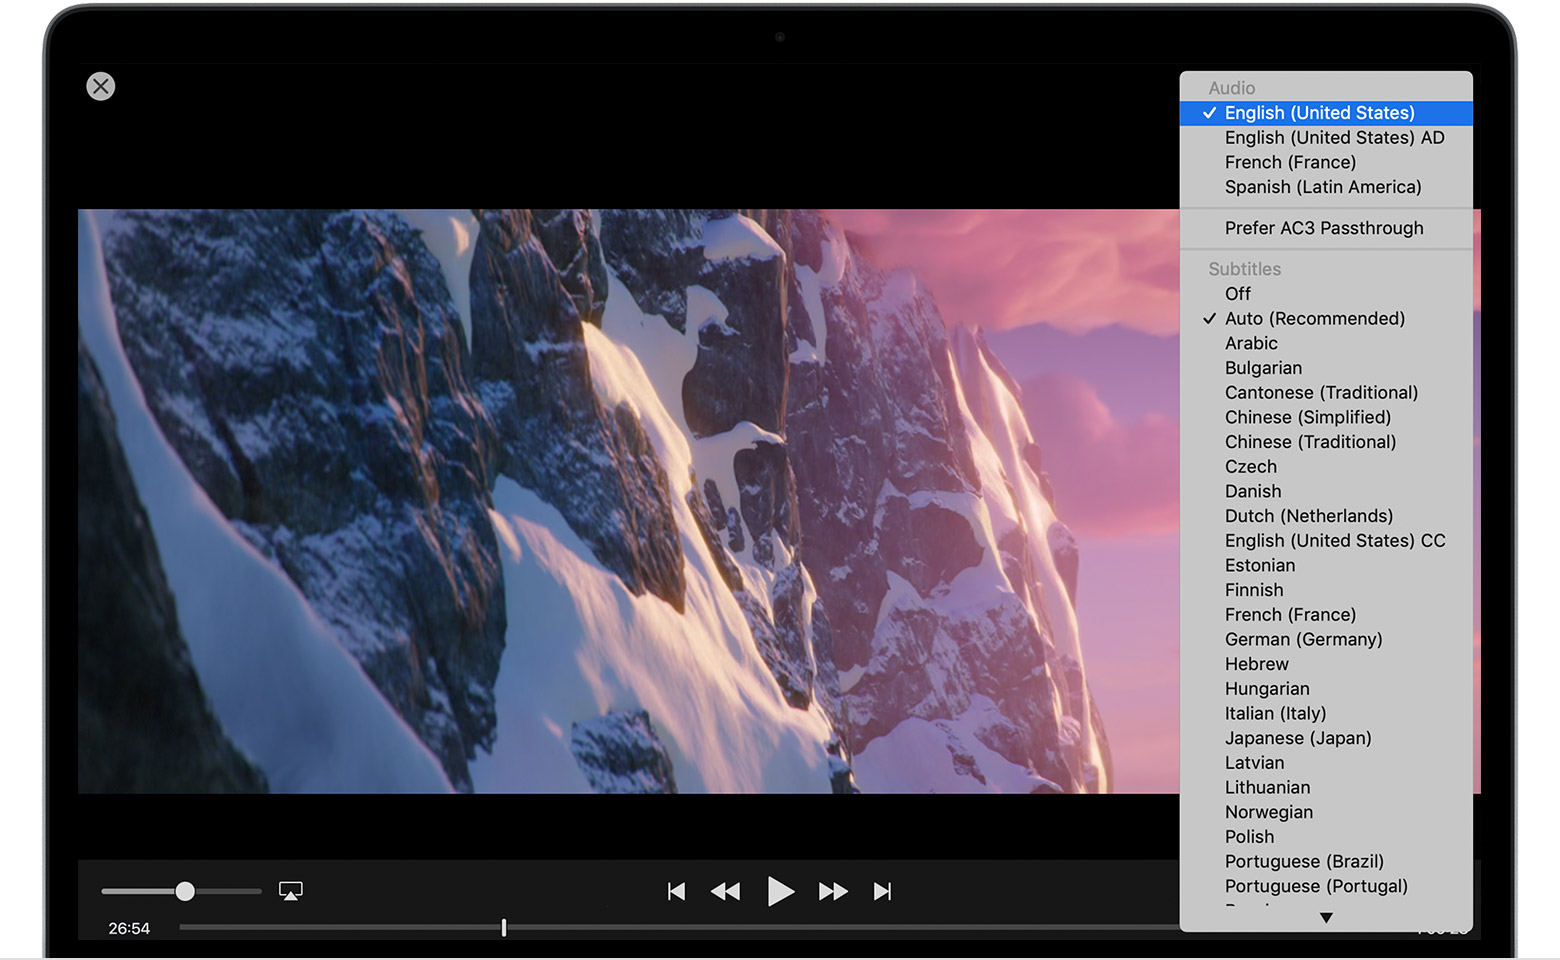 apple tv video player with subtitle support